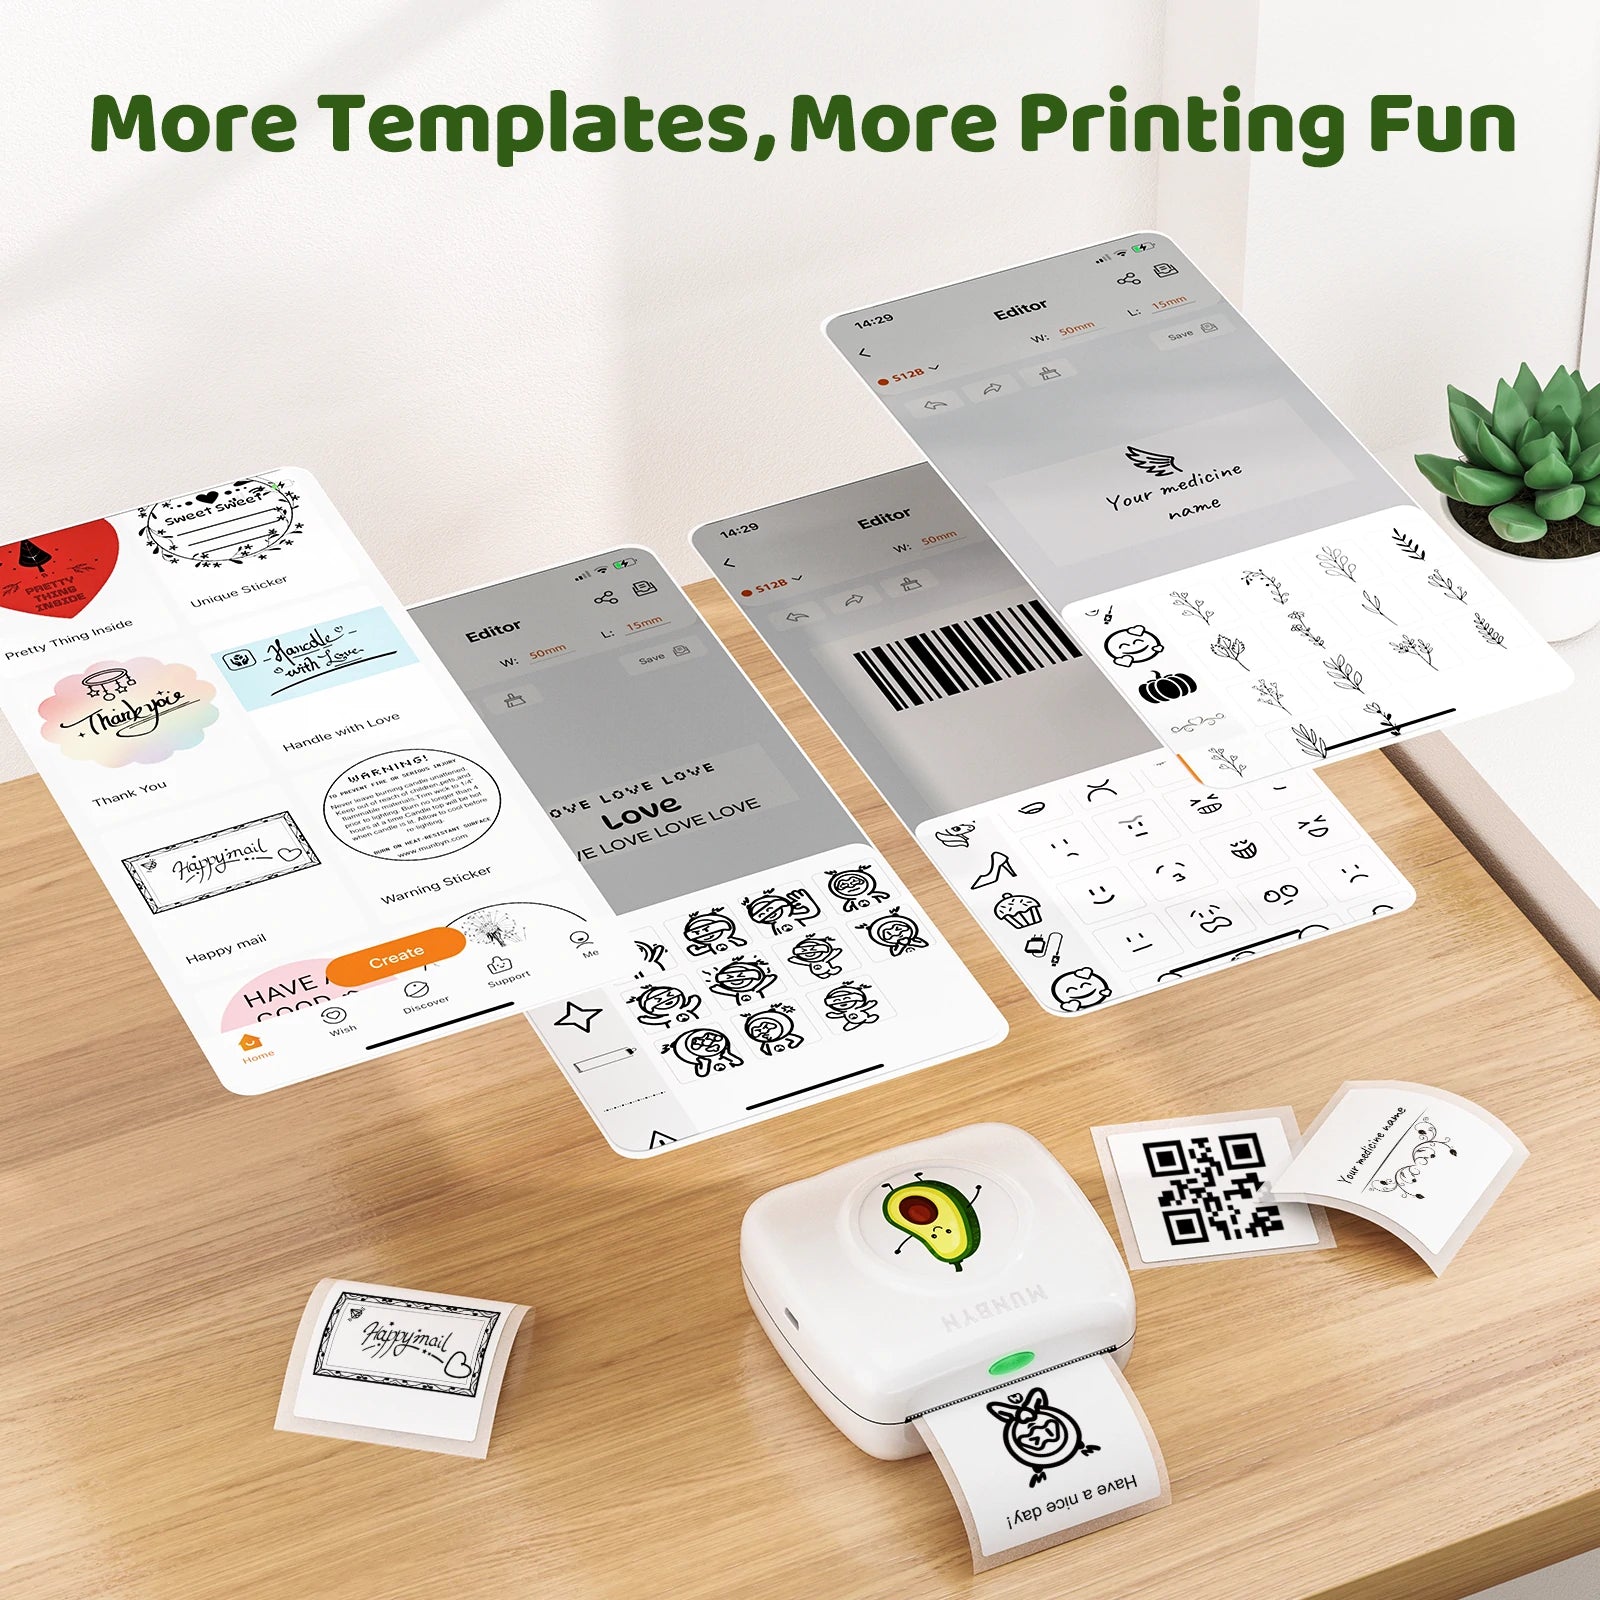 MUNBYN pocket thermal printer supports various templates in MUNBYN Print app.